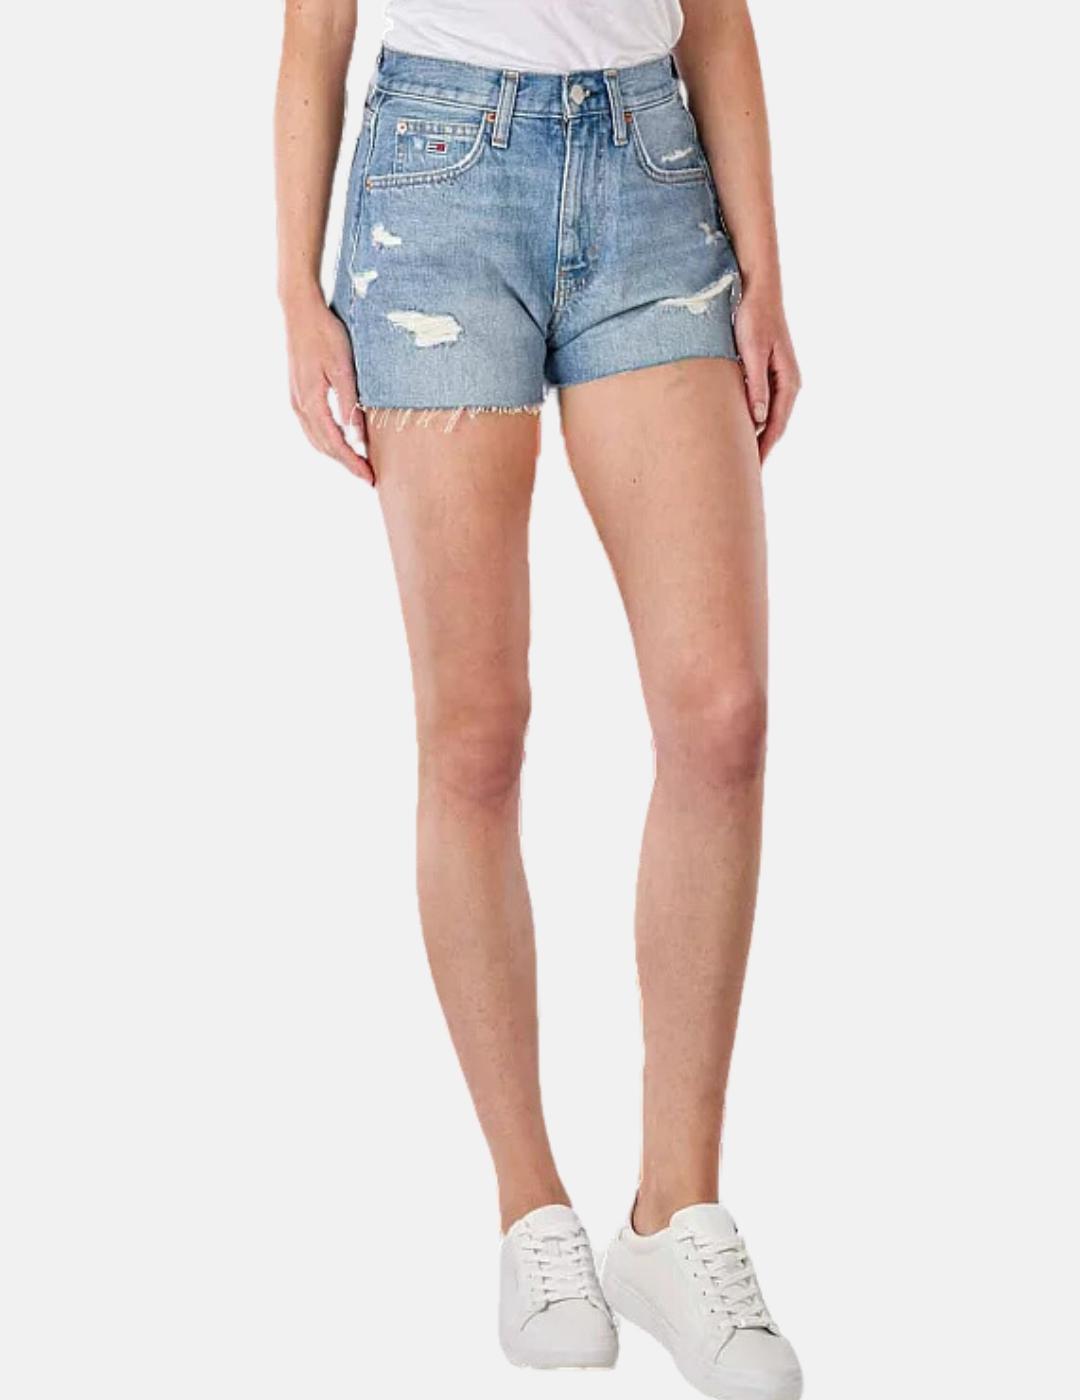 Short Tommy Jeans Azul para Mujer